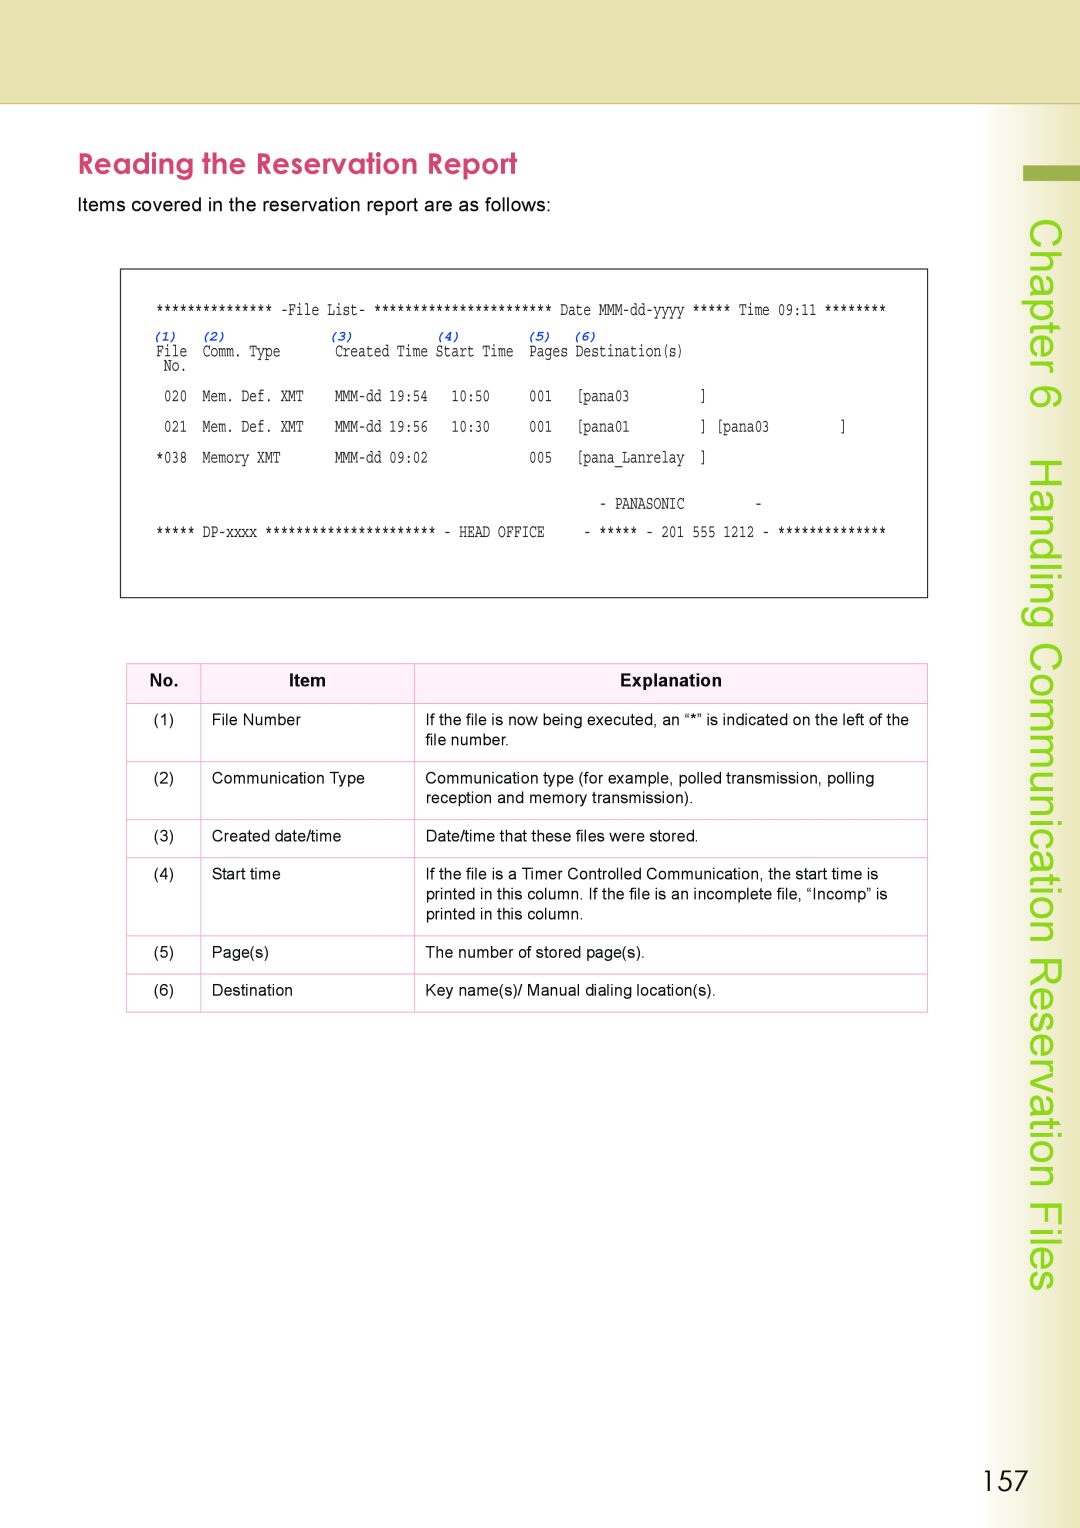 Philips DP-C262 manual Reading the Reservation Report, Handling Communication Reservation Files 